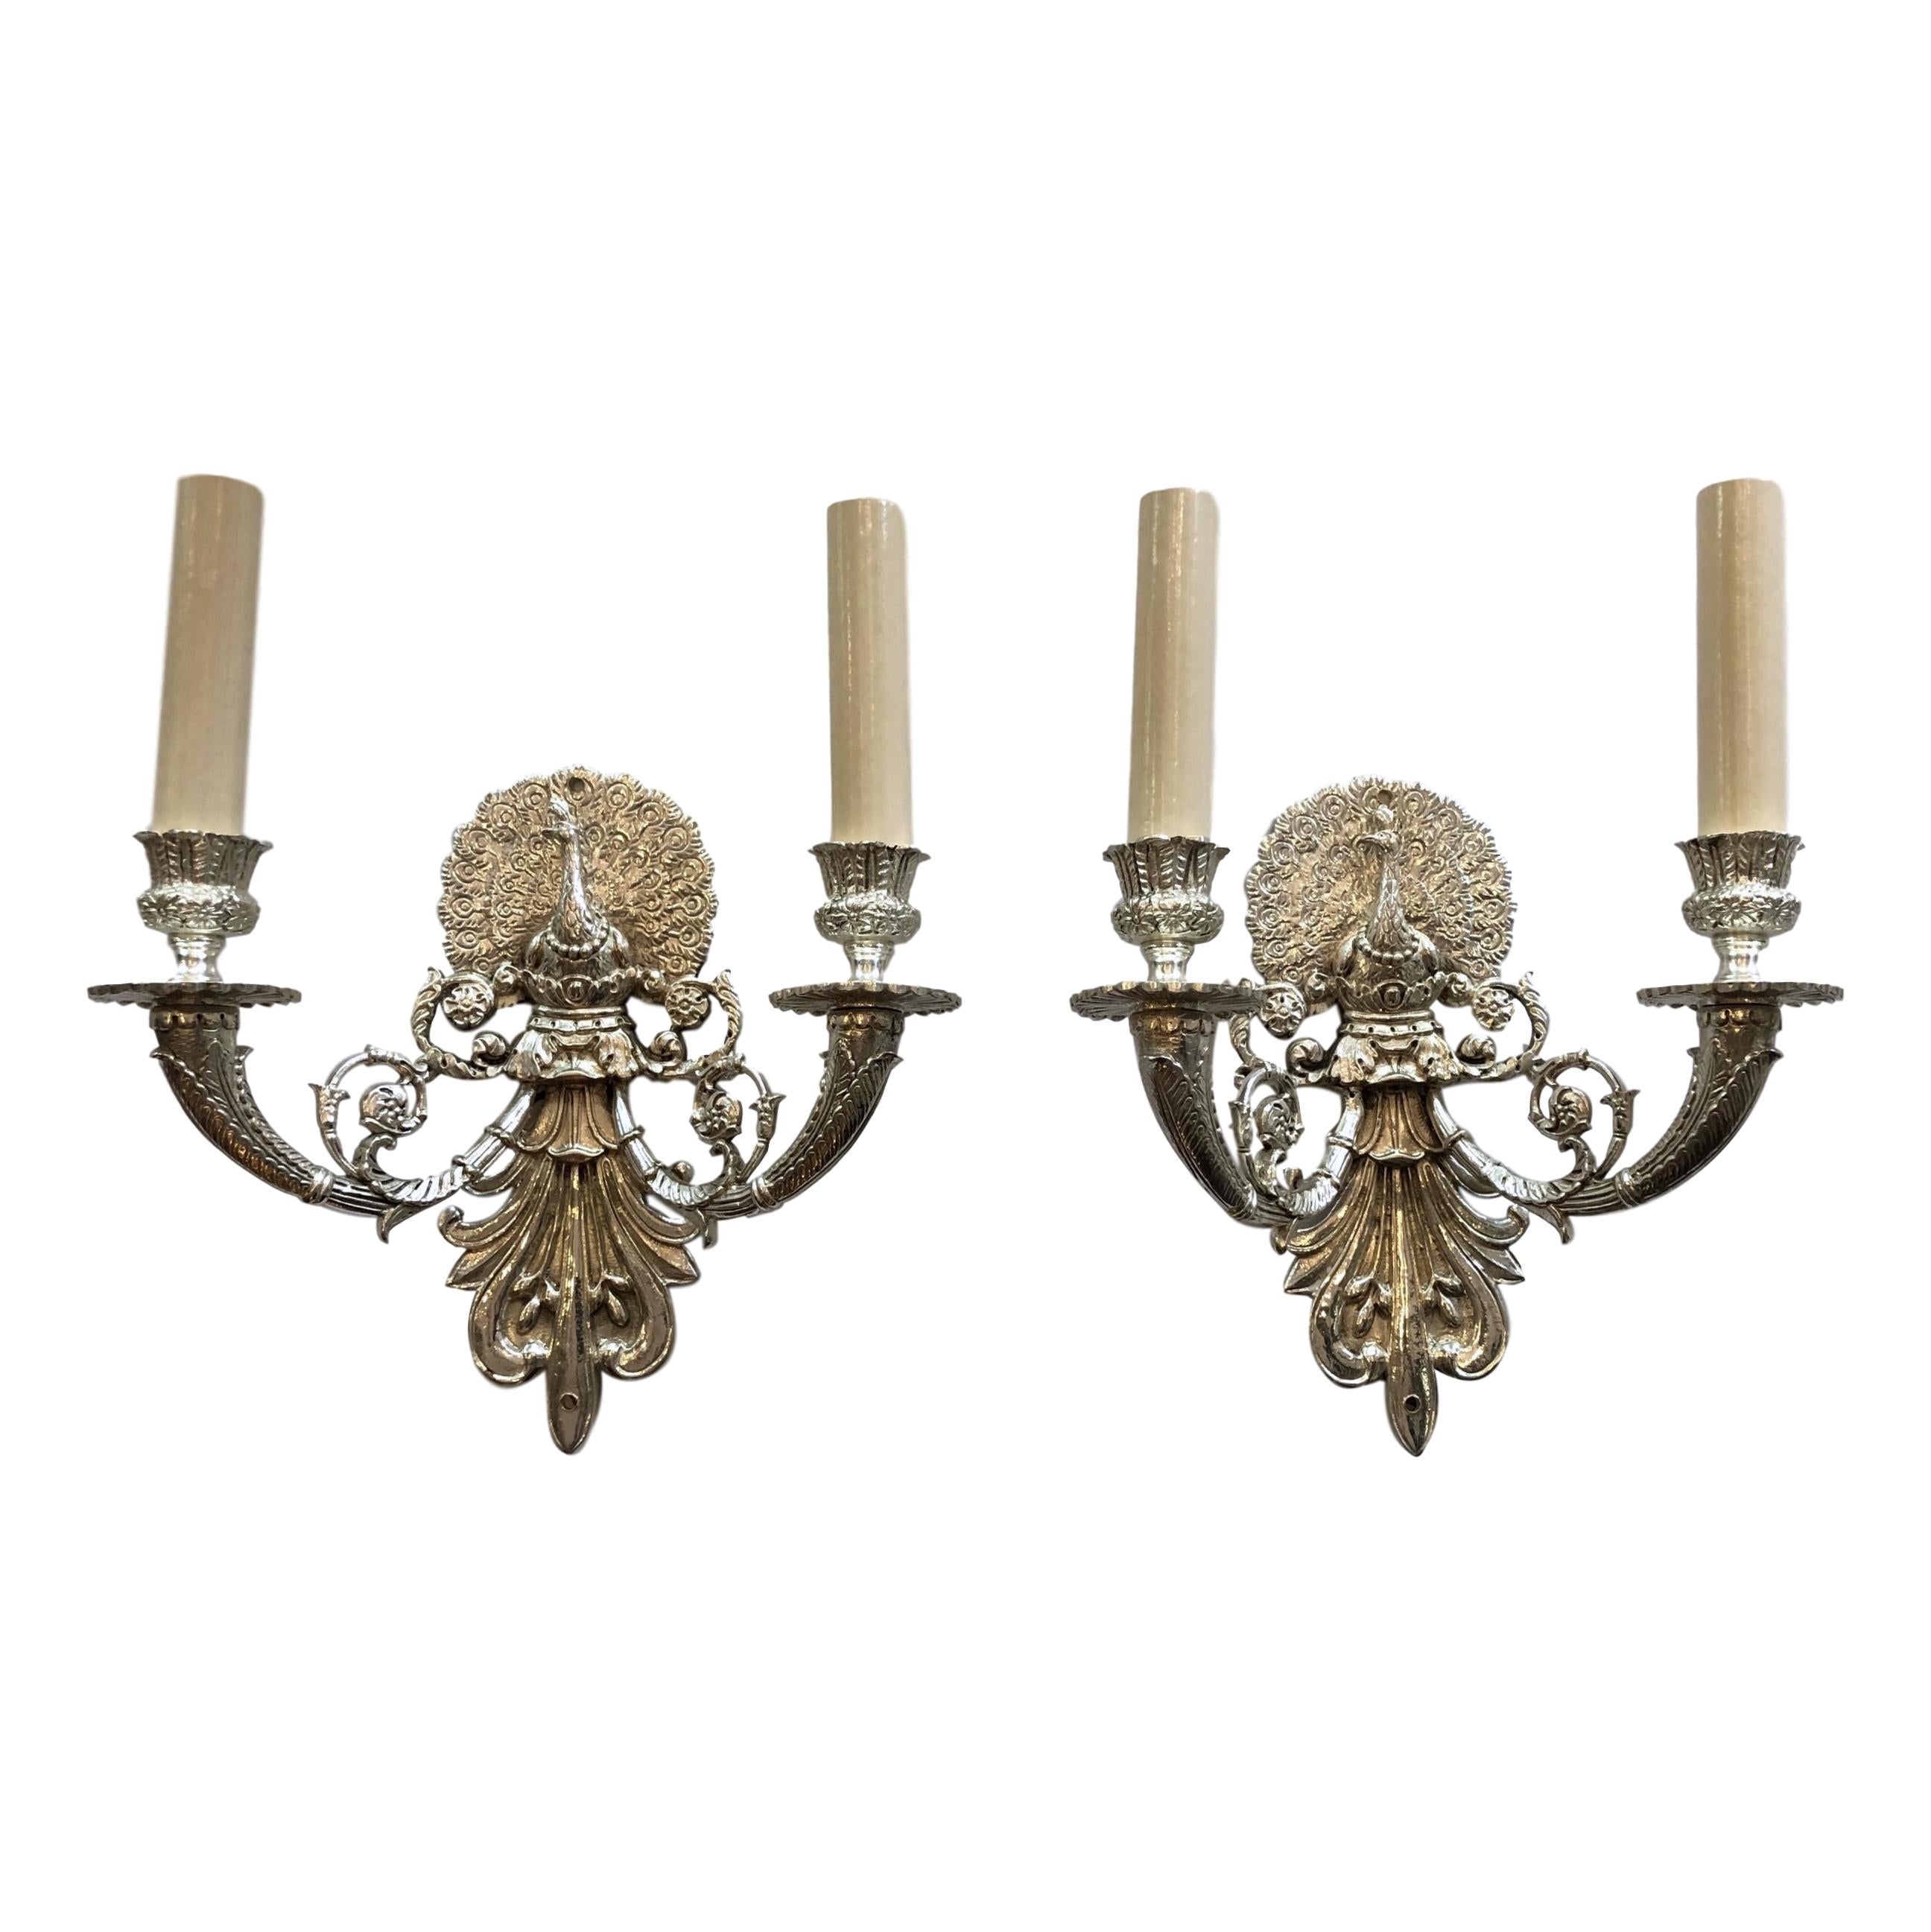 Nickel-Plated Peacock Sconces